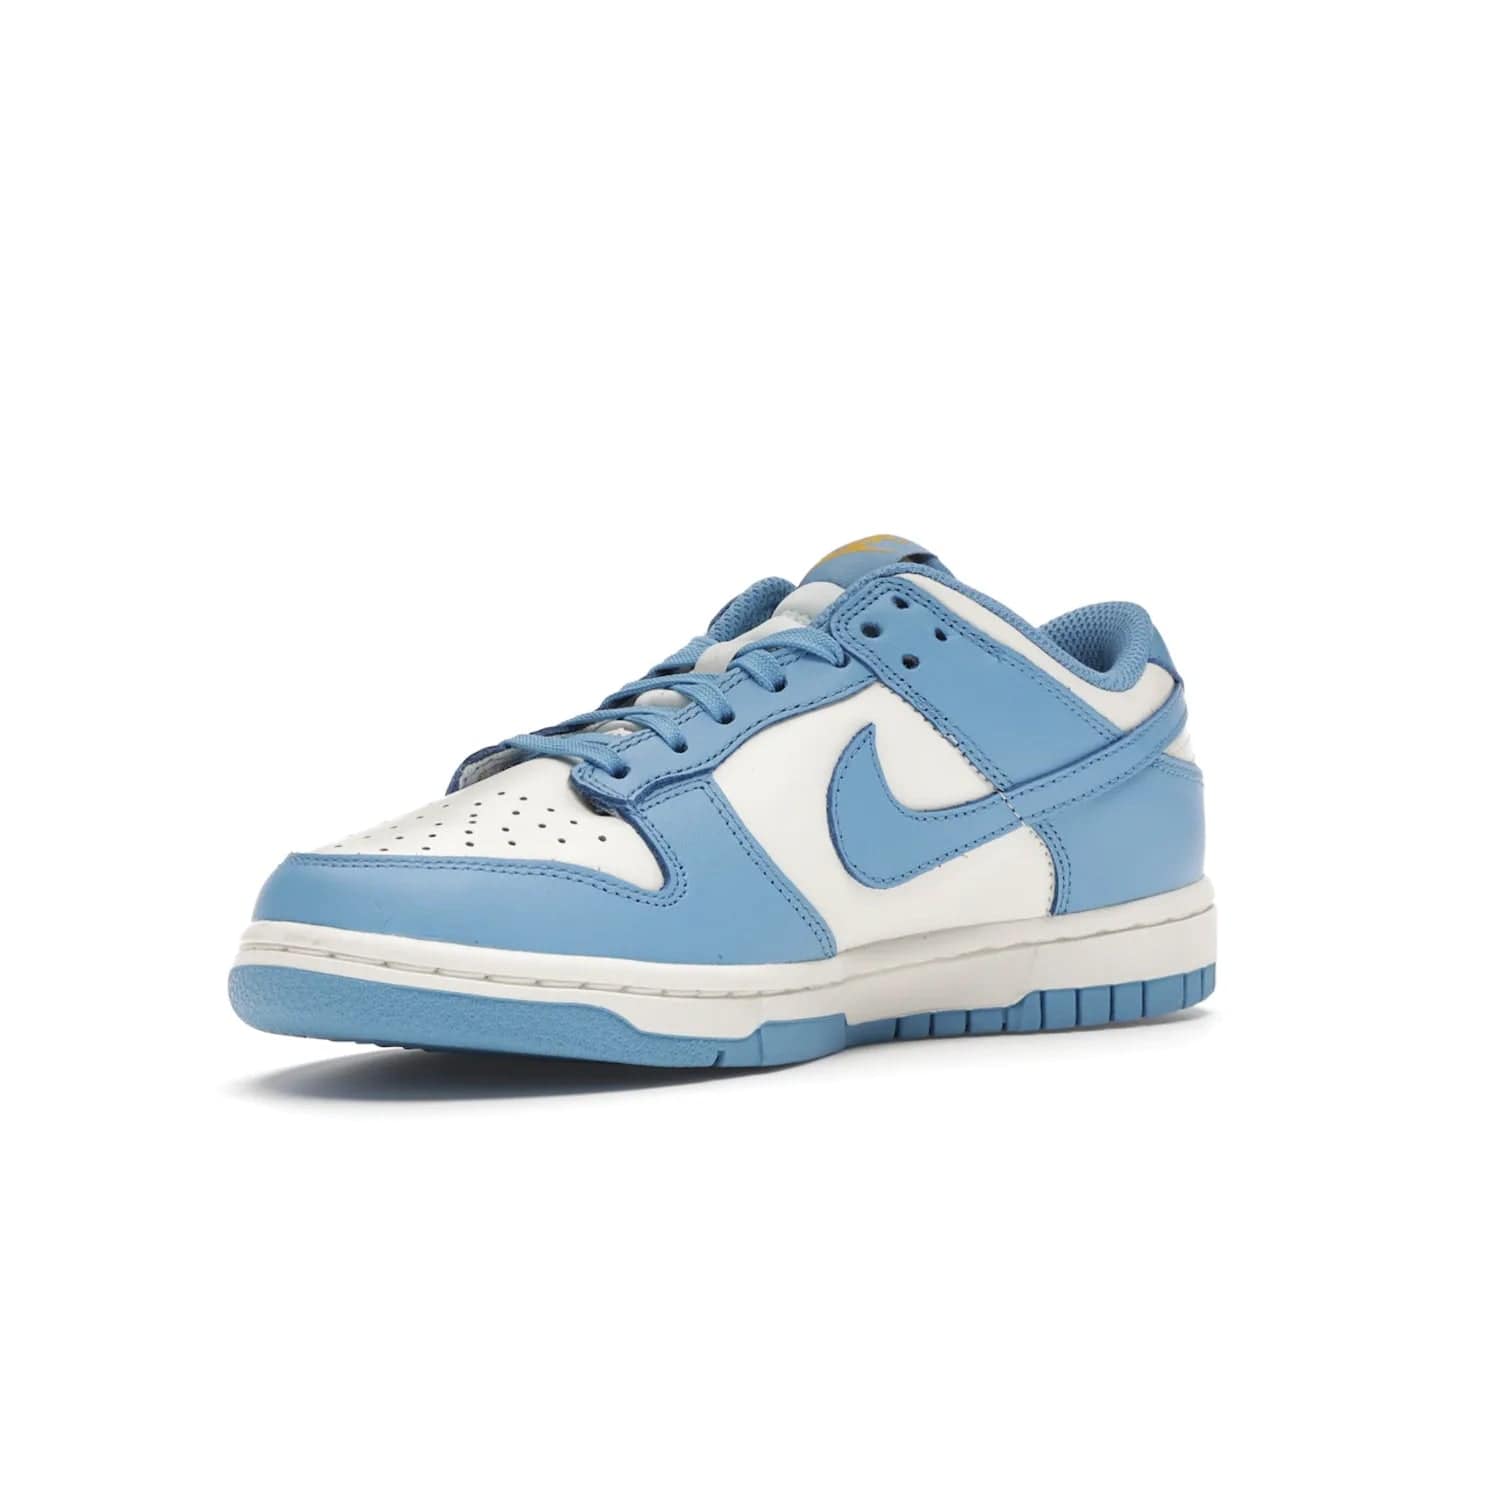 Nike Dunk Low Coast (Women's) - Image 15 - Only at www.BallersClubKickz.com - Iconic UCLA colors honor the west coast with the Nike Dunk Low Coast (Women's), a bold combo of light blue, white and yellow. Light leather upper with white midsole and light EVA outsole offer a modern twist. Released Feb 2021 for $100.